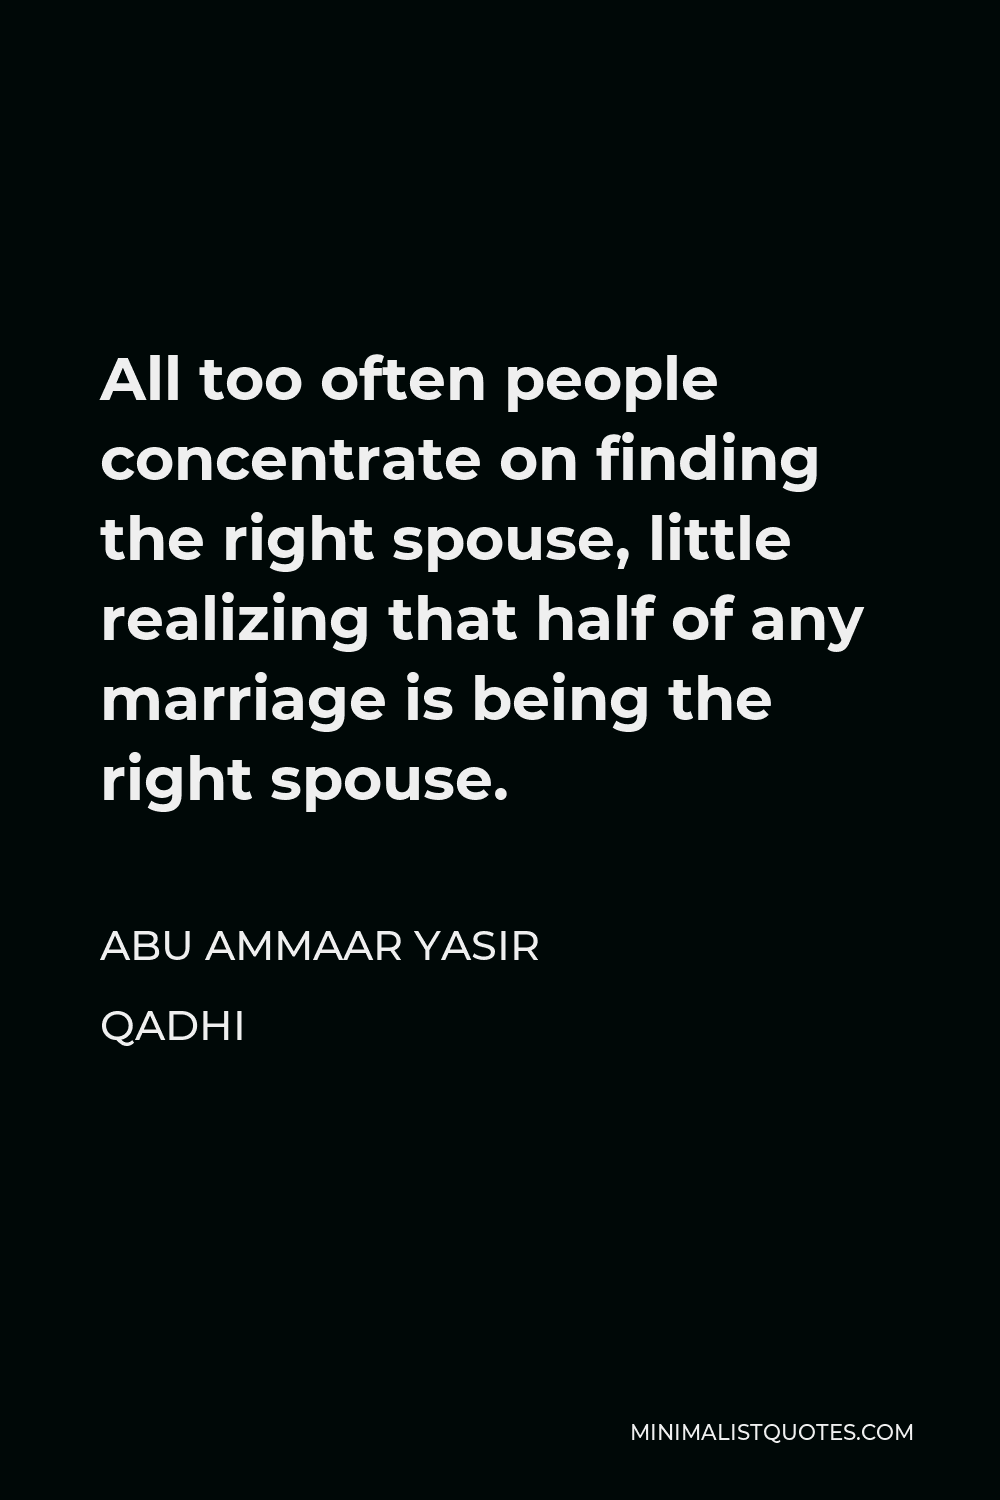 Abu Ammaar Yasir Qadhi Quote - All too often people concentrate on finding the right spouse, little realizing that half of any marriage is being the right spouse.